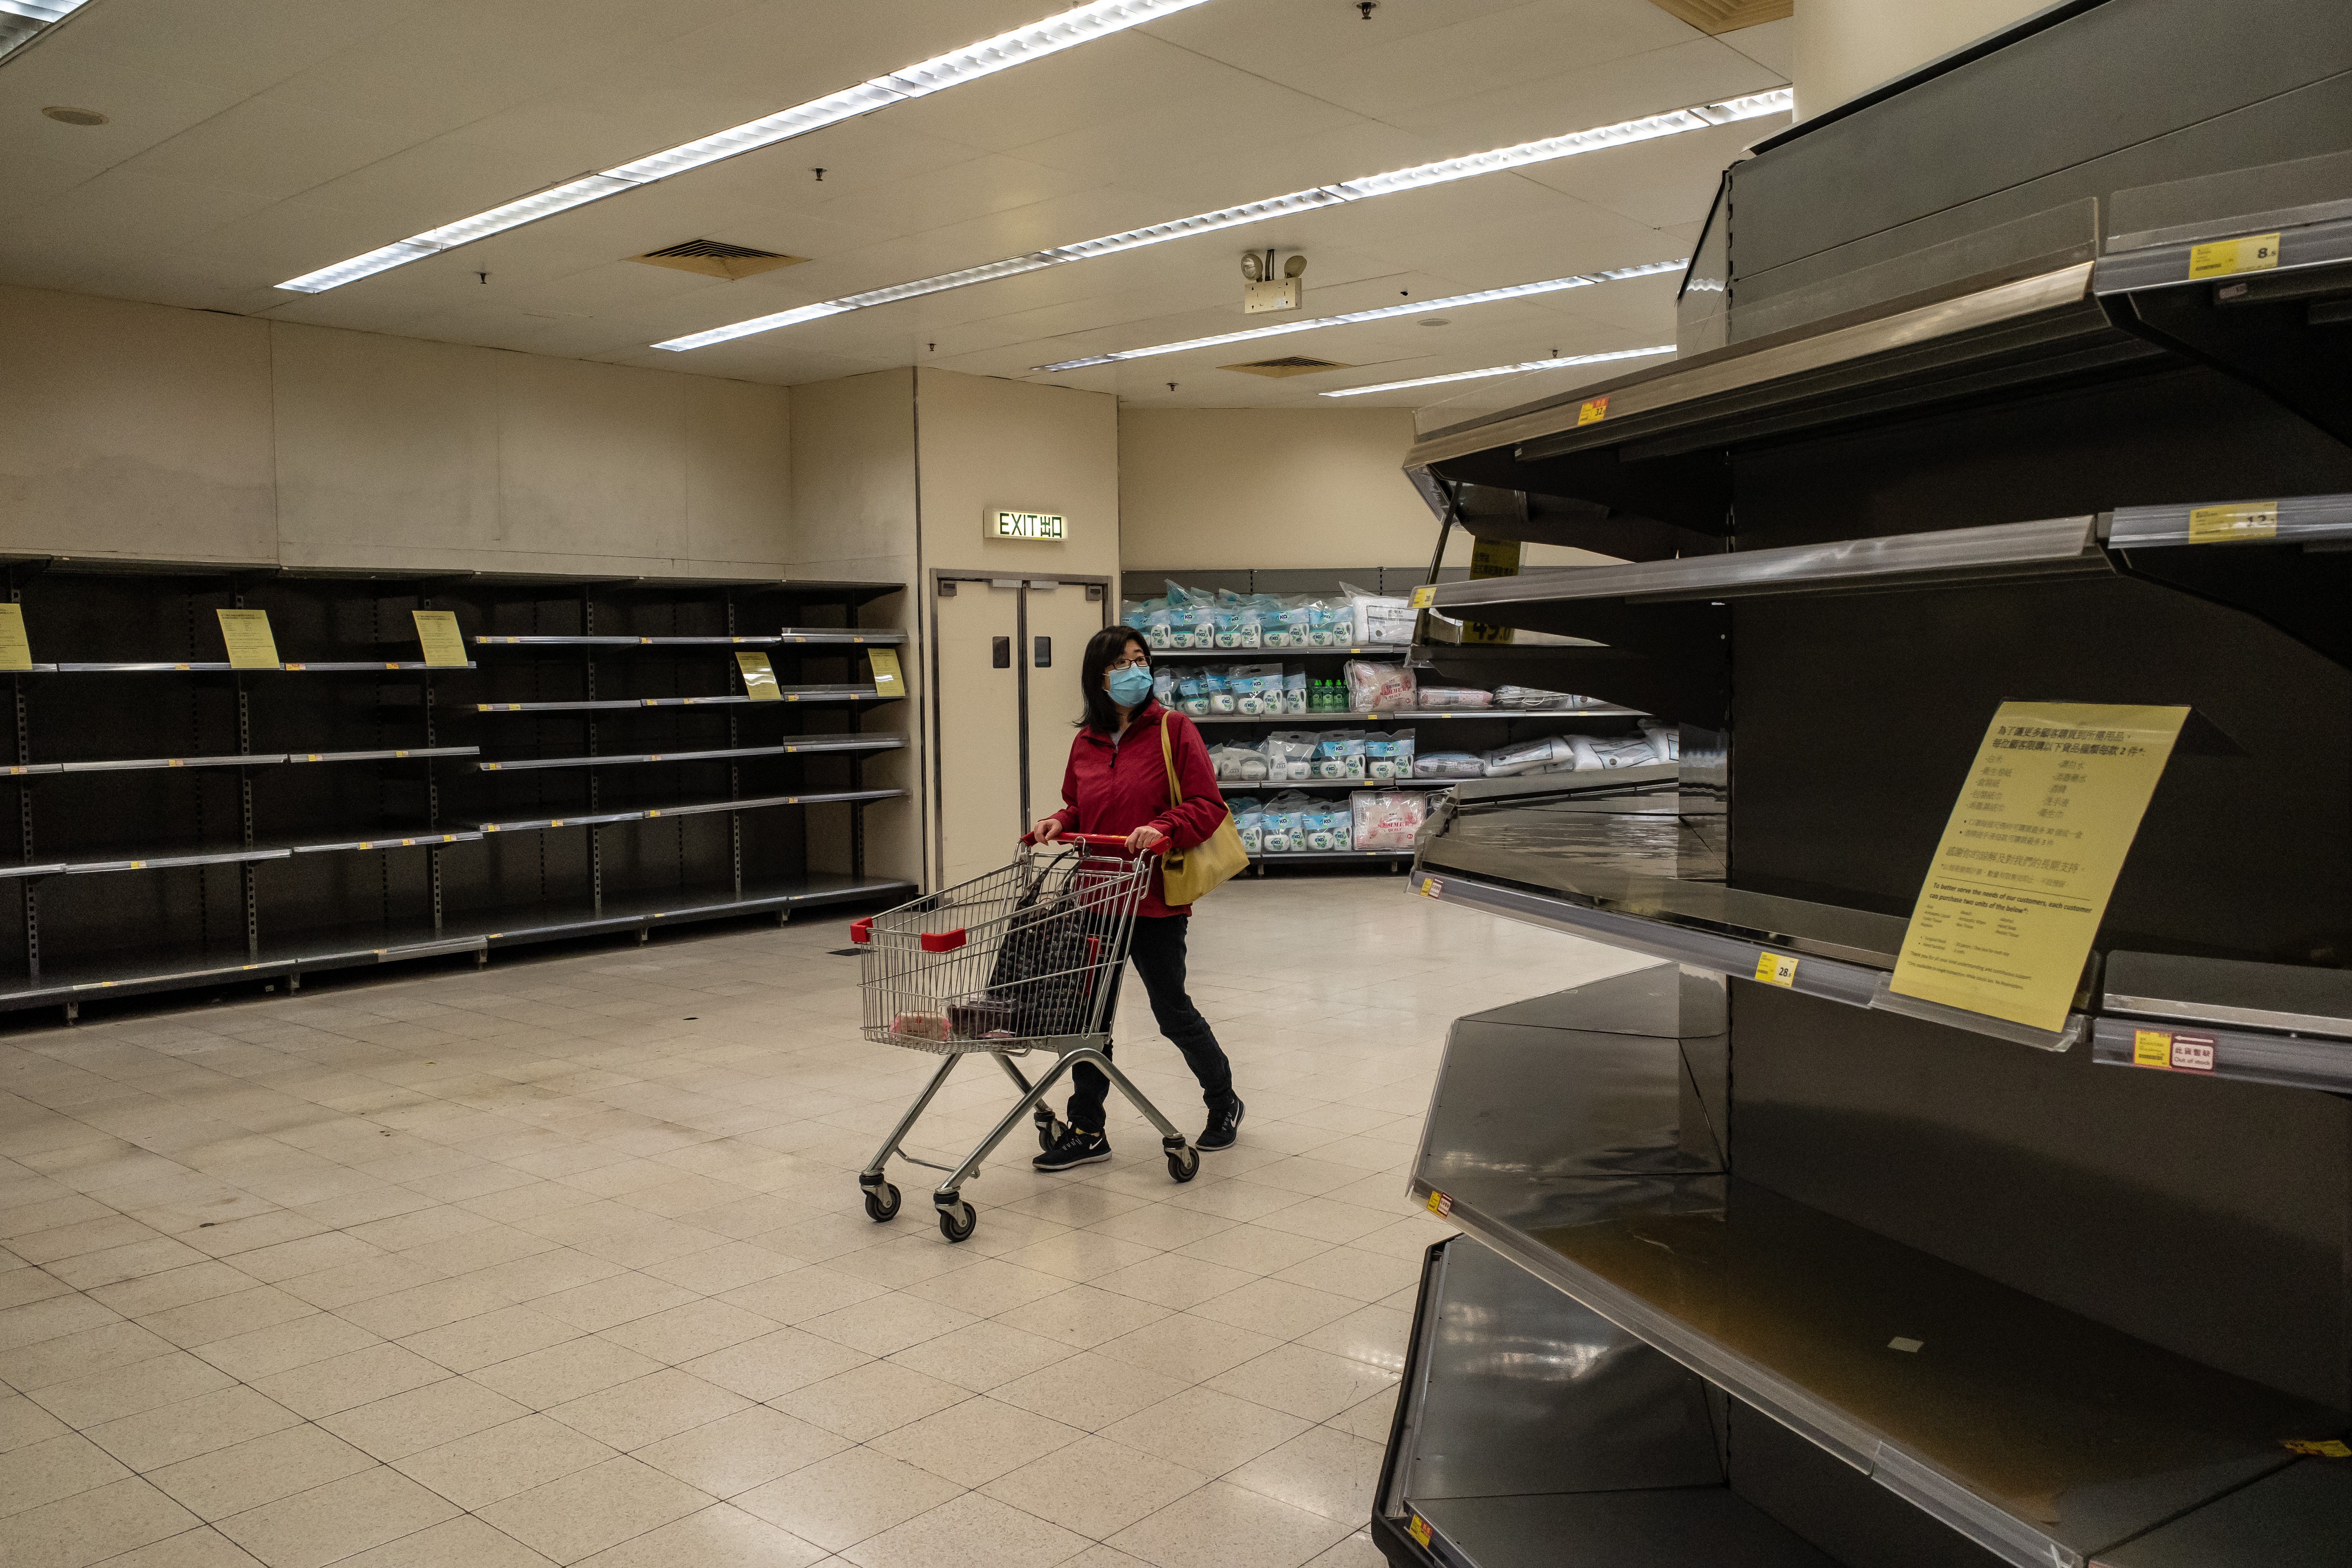 A shopper wearing a face mask pushes a shopping trolley past empty shelves inside a store in Hong Kong earlier this month. Photo: TNS